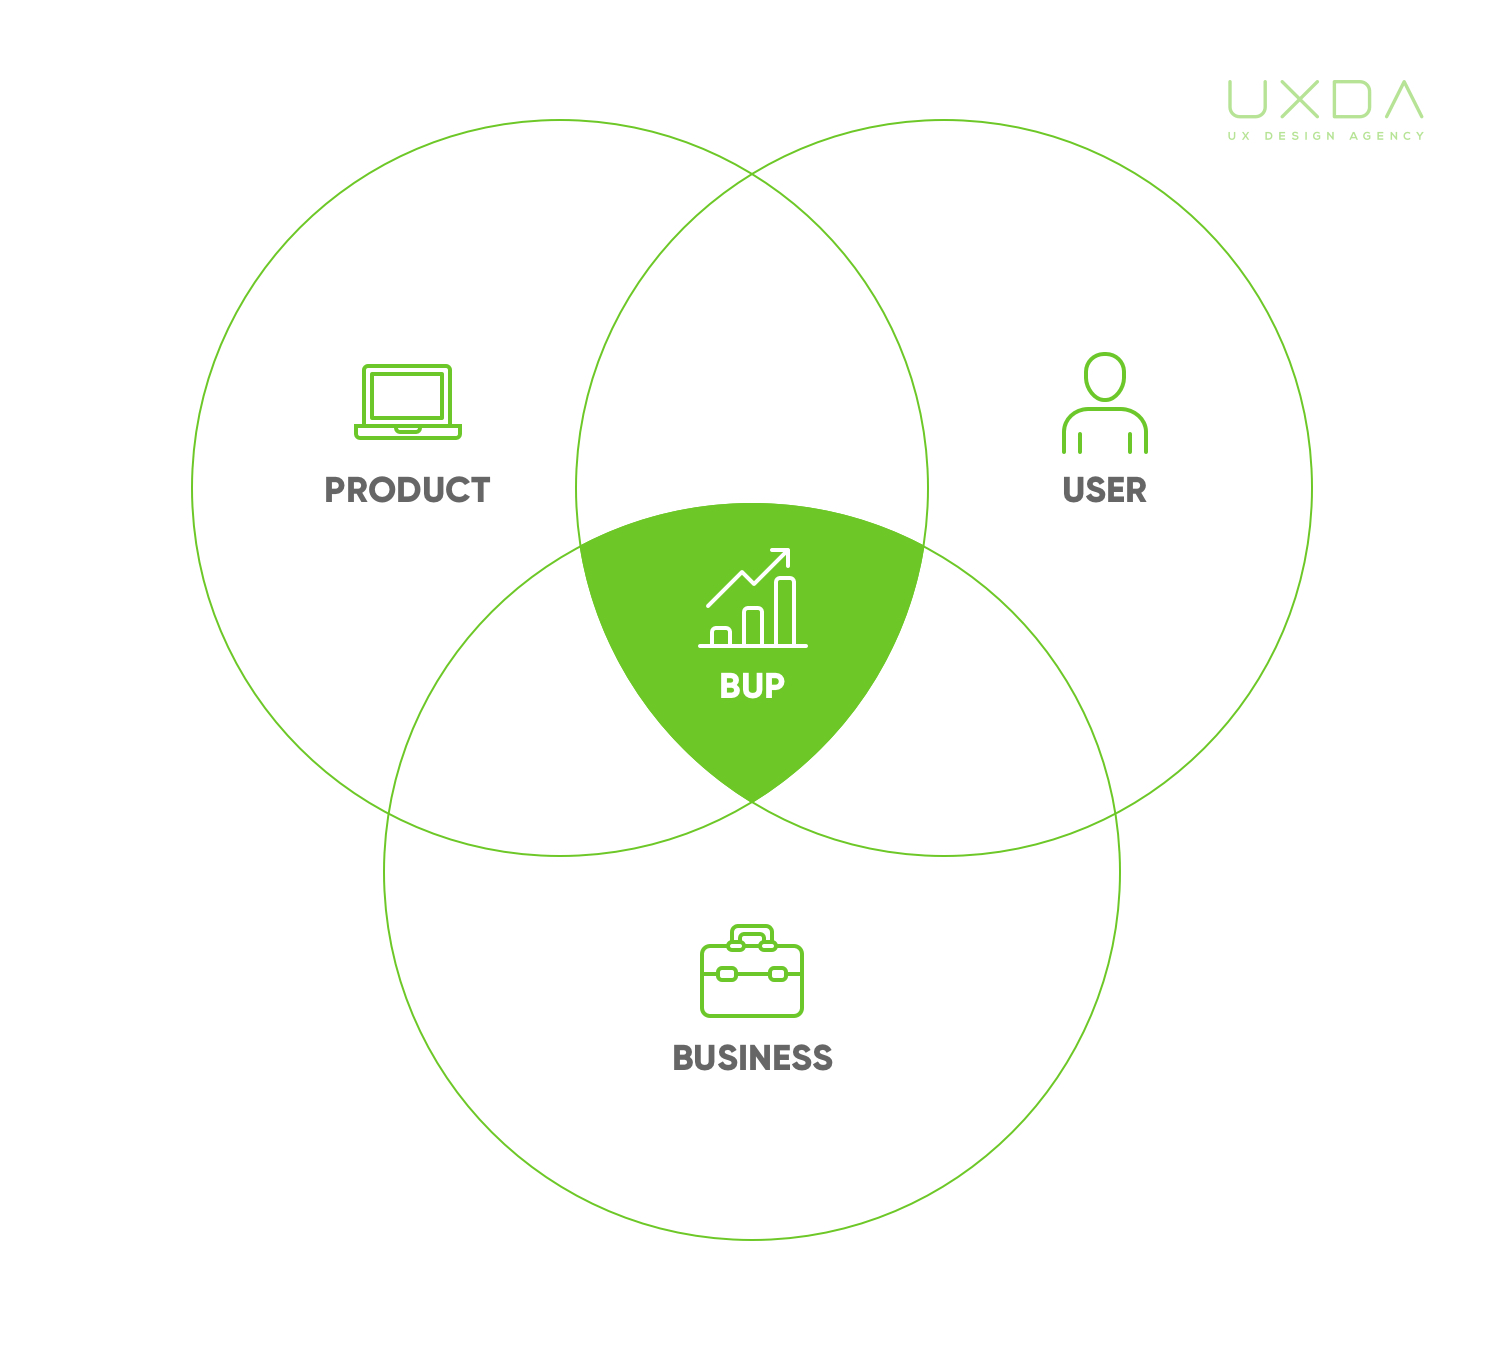 ux-design-for-fintech-uxda-work-process-bup-business-user-product-S.jpg